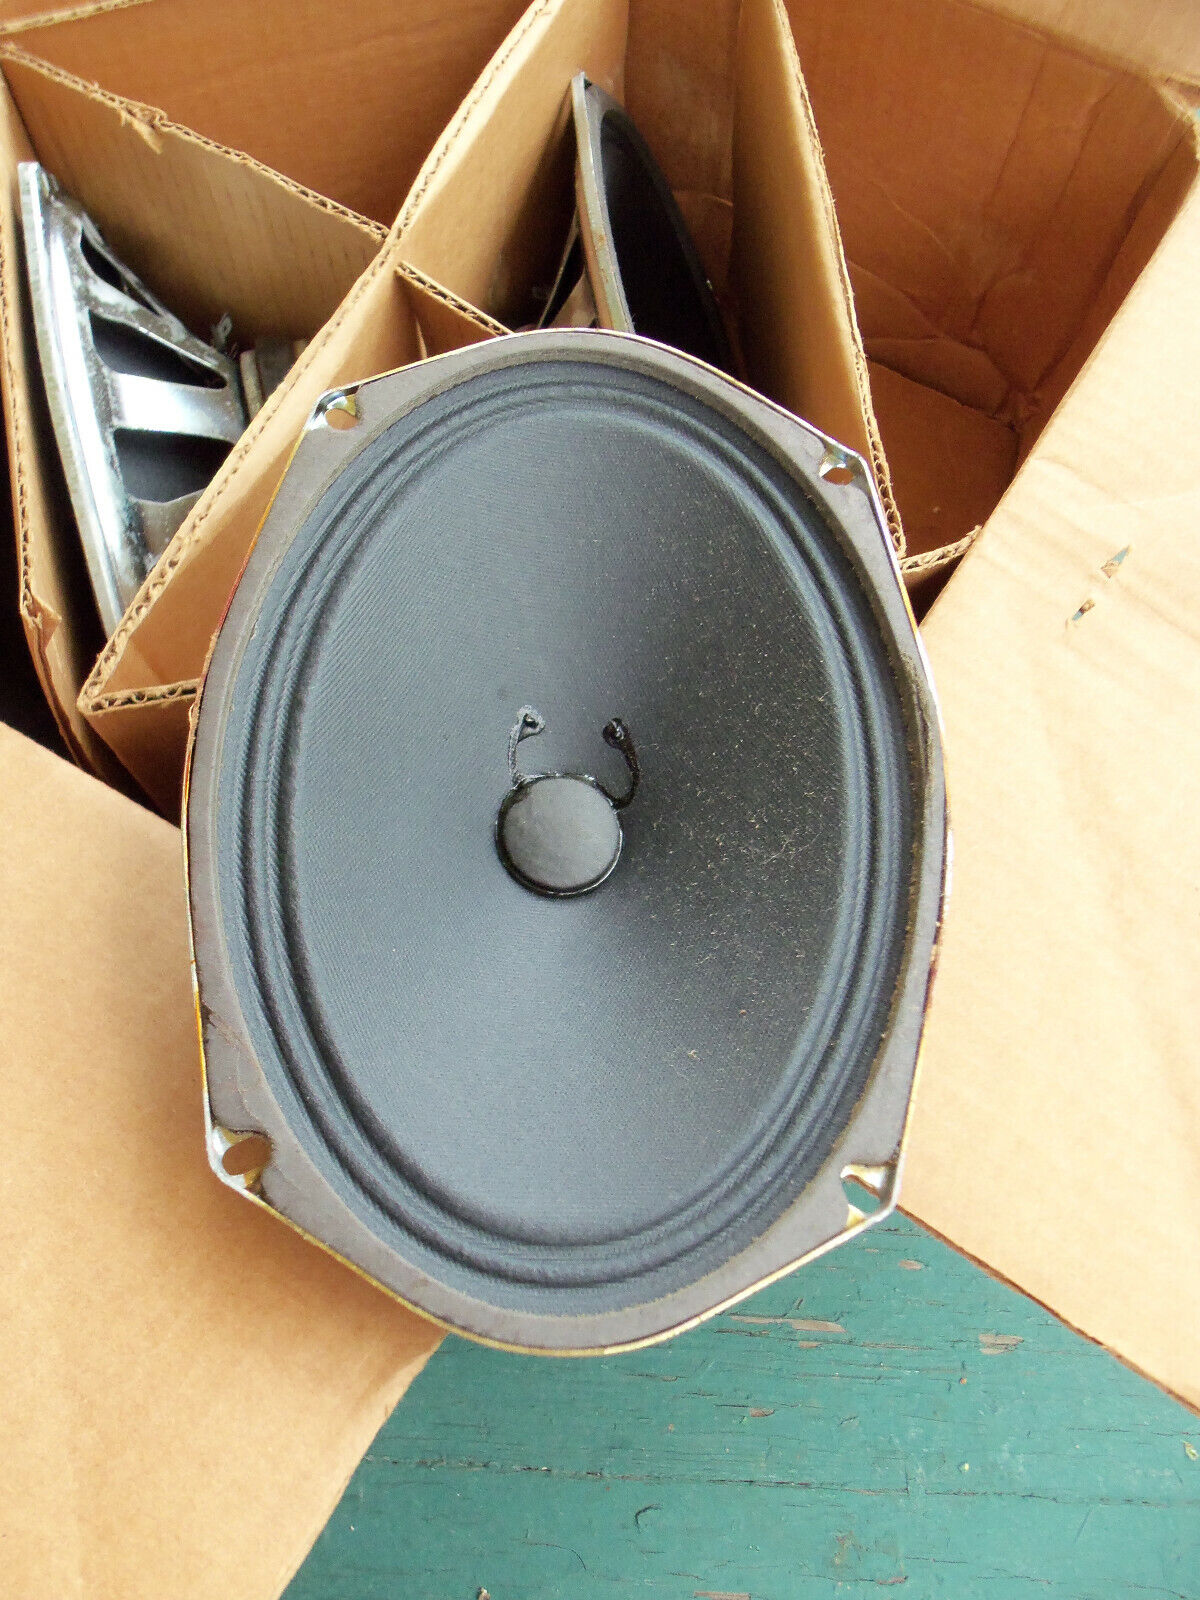 New Old Stock Vintage 6 x 9 Speakers for Valco, Supro, Gretsch amplifiers 8 ohm